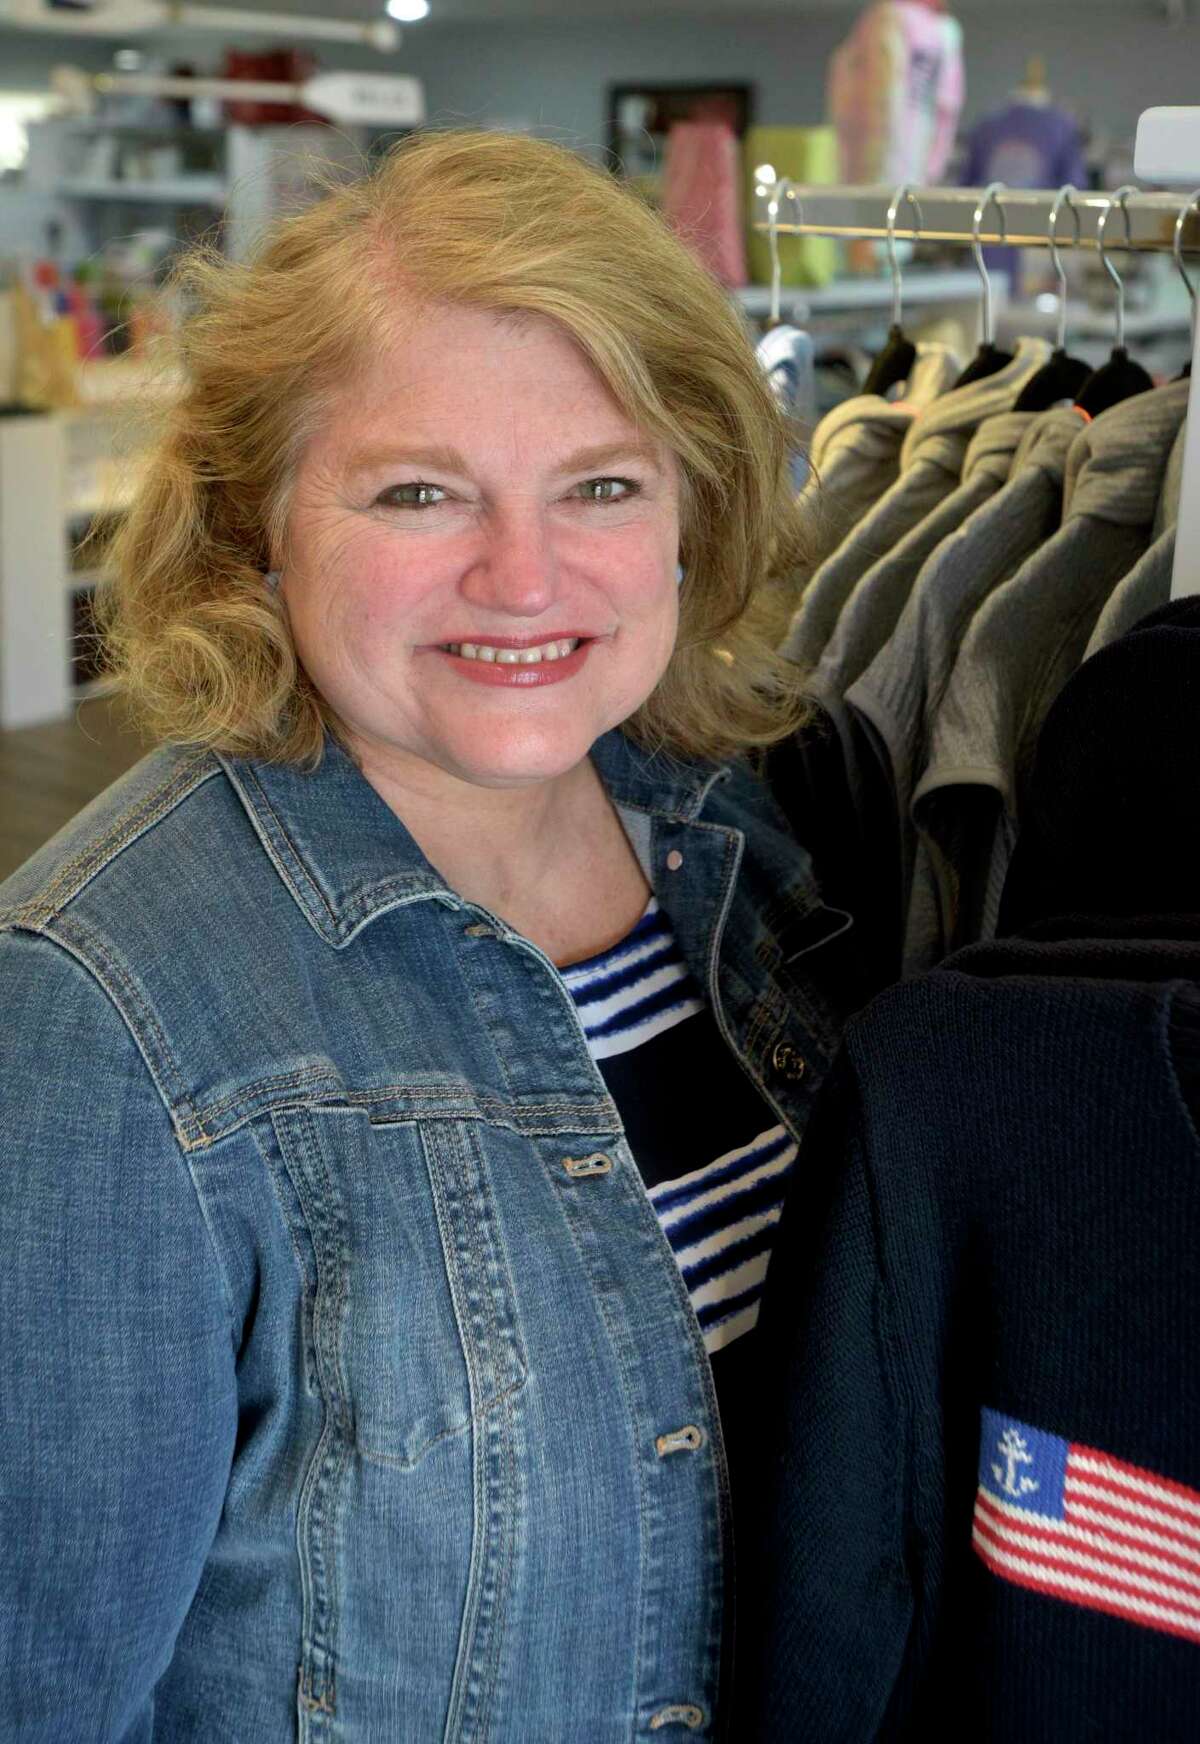 Piper and Dune owner Christine Curtis in her retail shop, a New England-style gift shop, in Bennett Square in Southbury, Conn. Thursday, March 11, 2021.